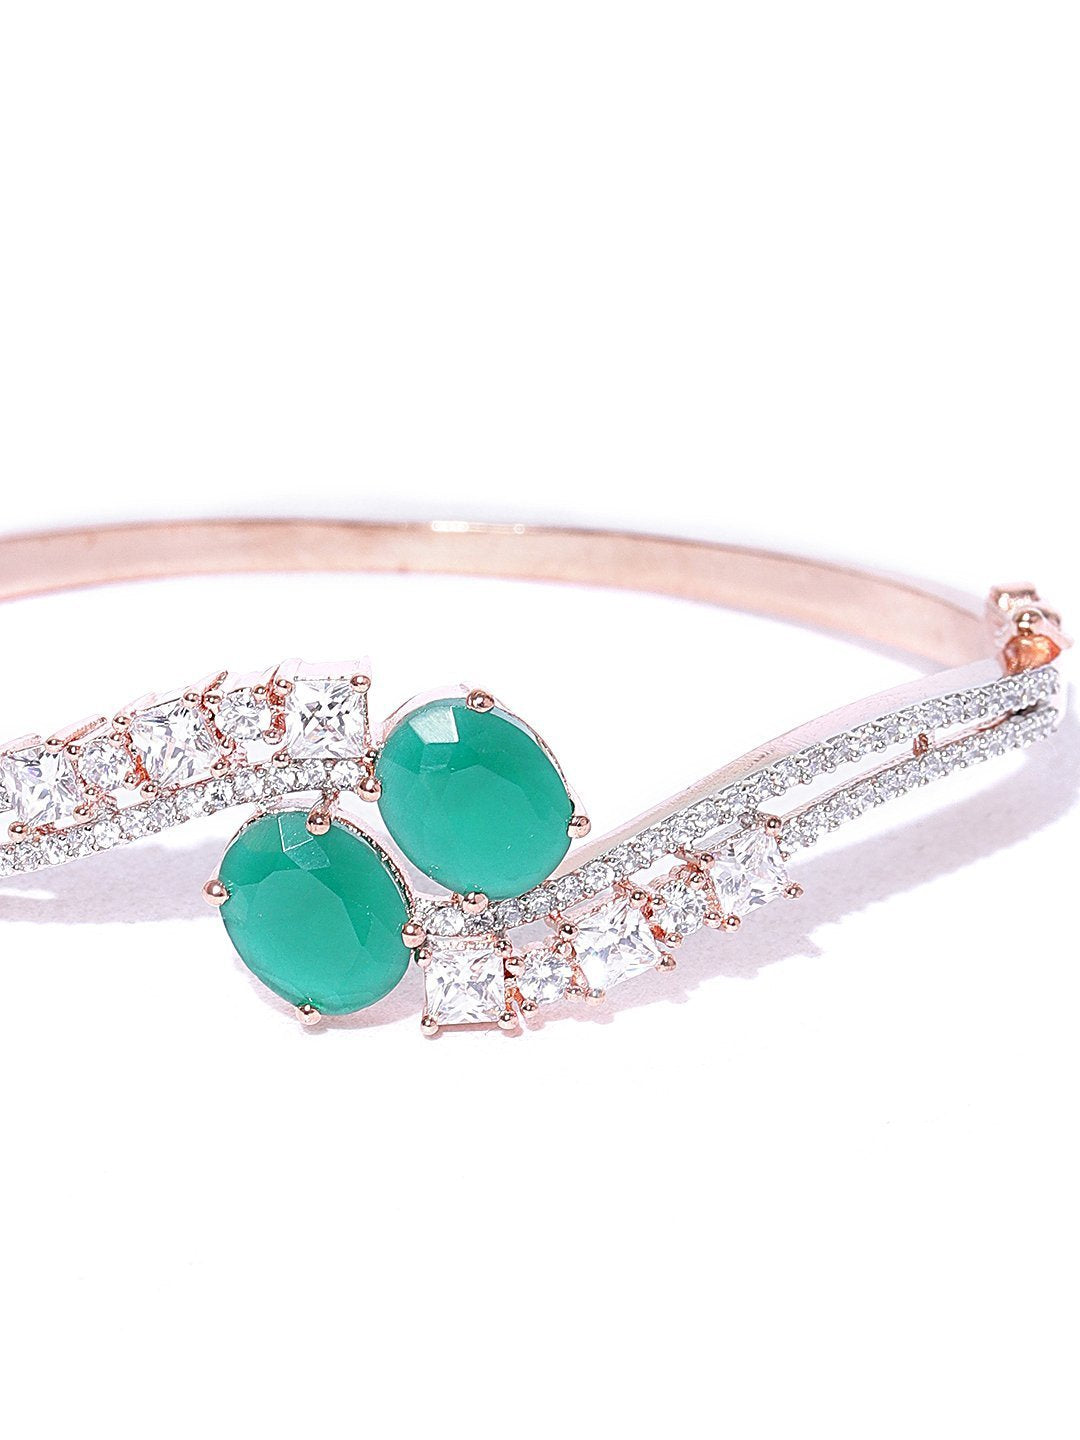 Women's Rose Gold-Plated American Diamond and Emerald Studded Bracelet in Green Color - Priyaasi